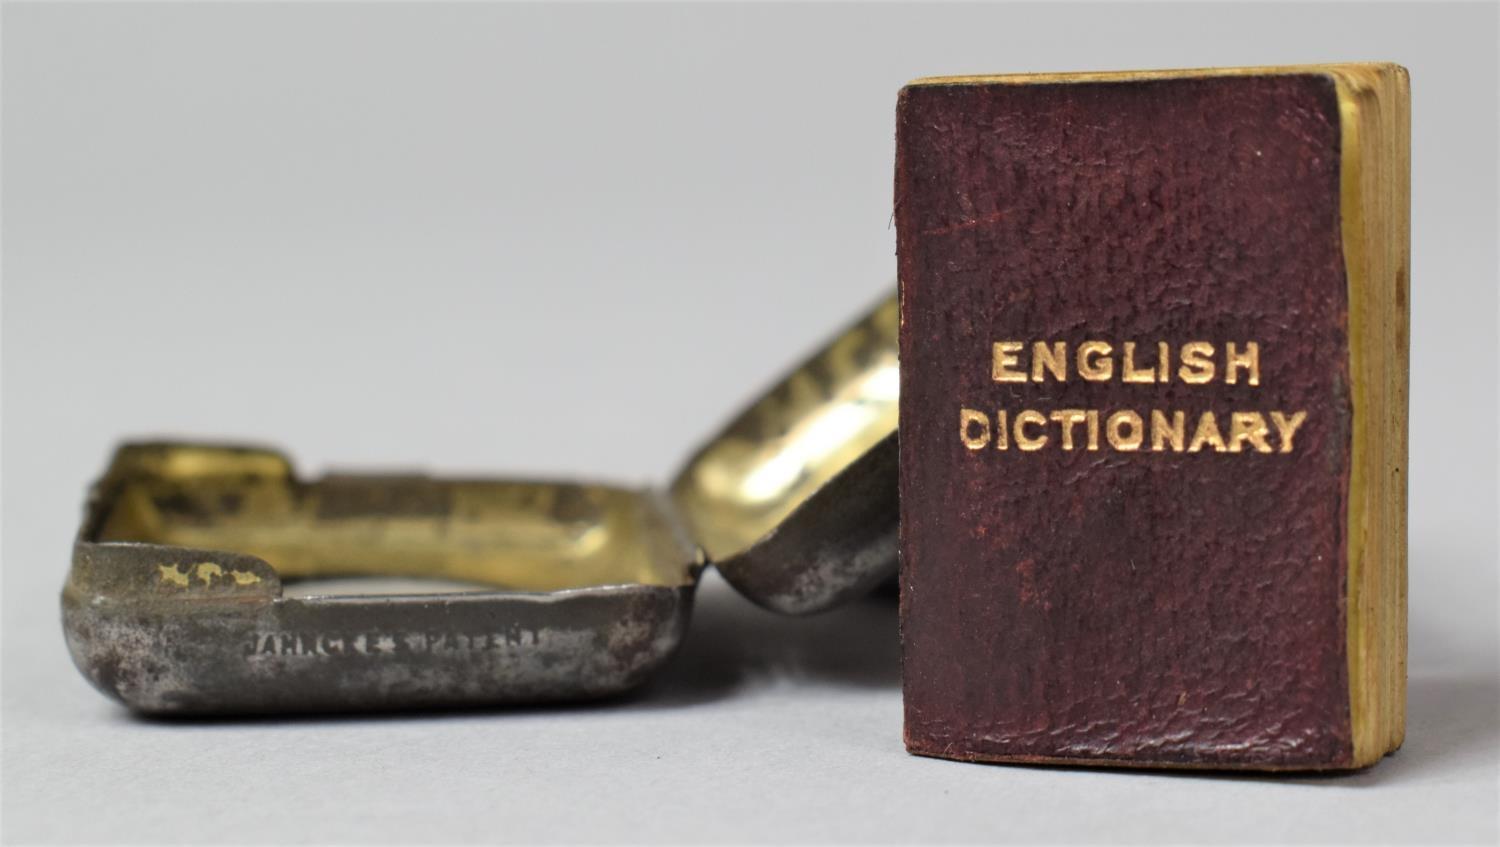 A Novelty "World's Smallest Dictionary", the Case having in Built Magnifying Glass - Image 3 of 4